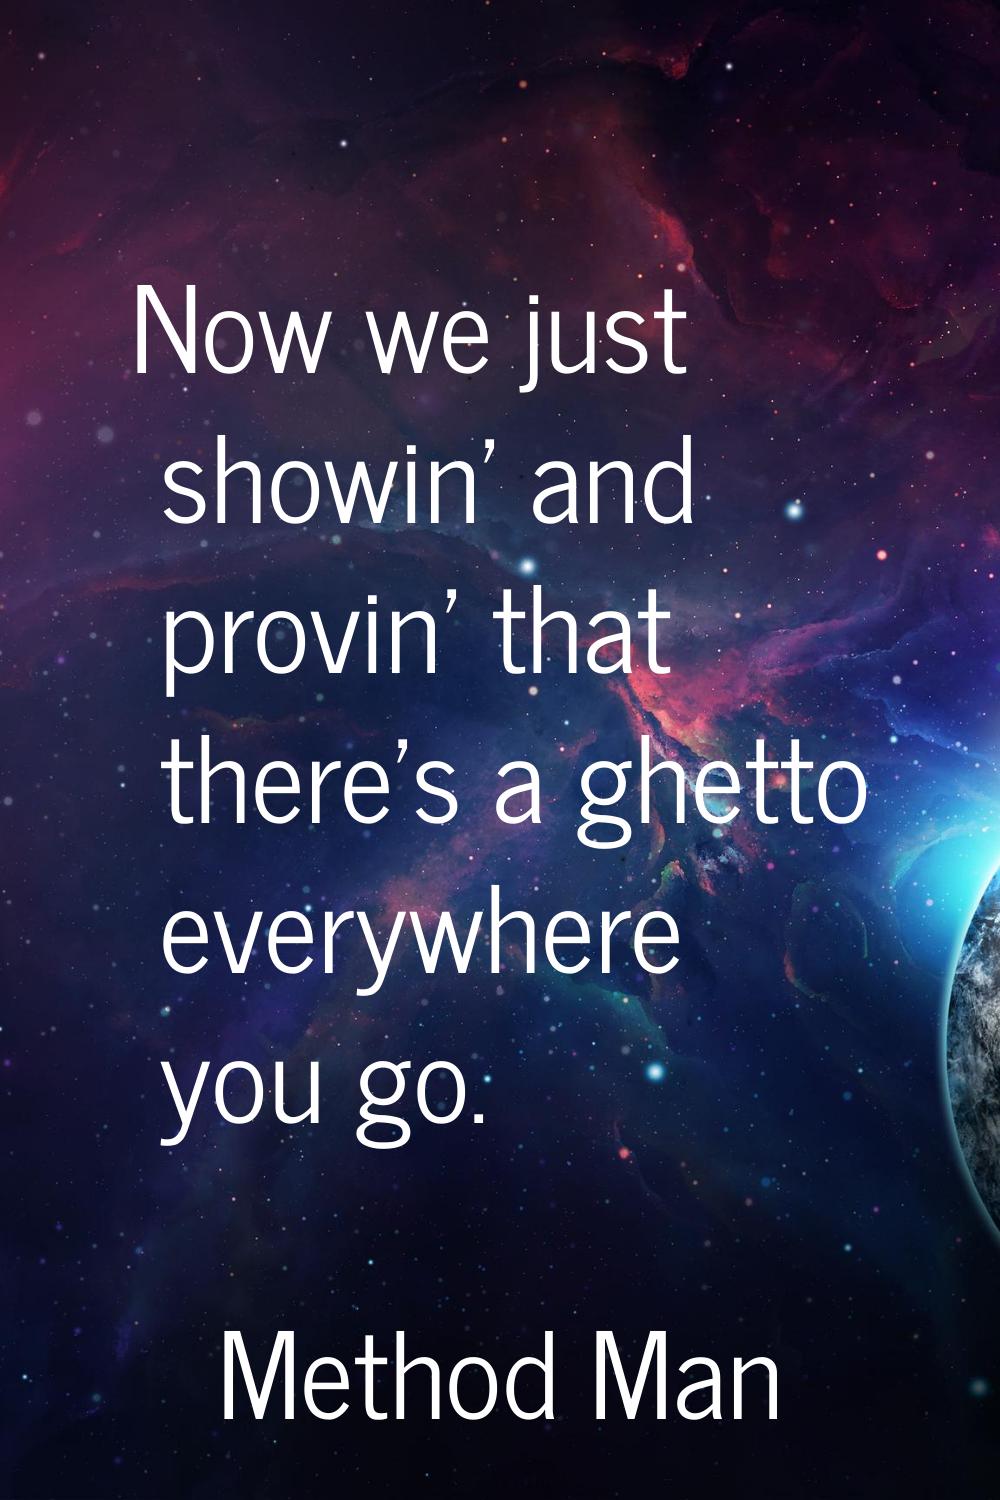 Now we just showin' and provin' that there's a ghetto everywhere you go.